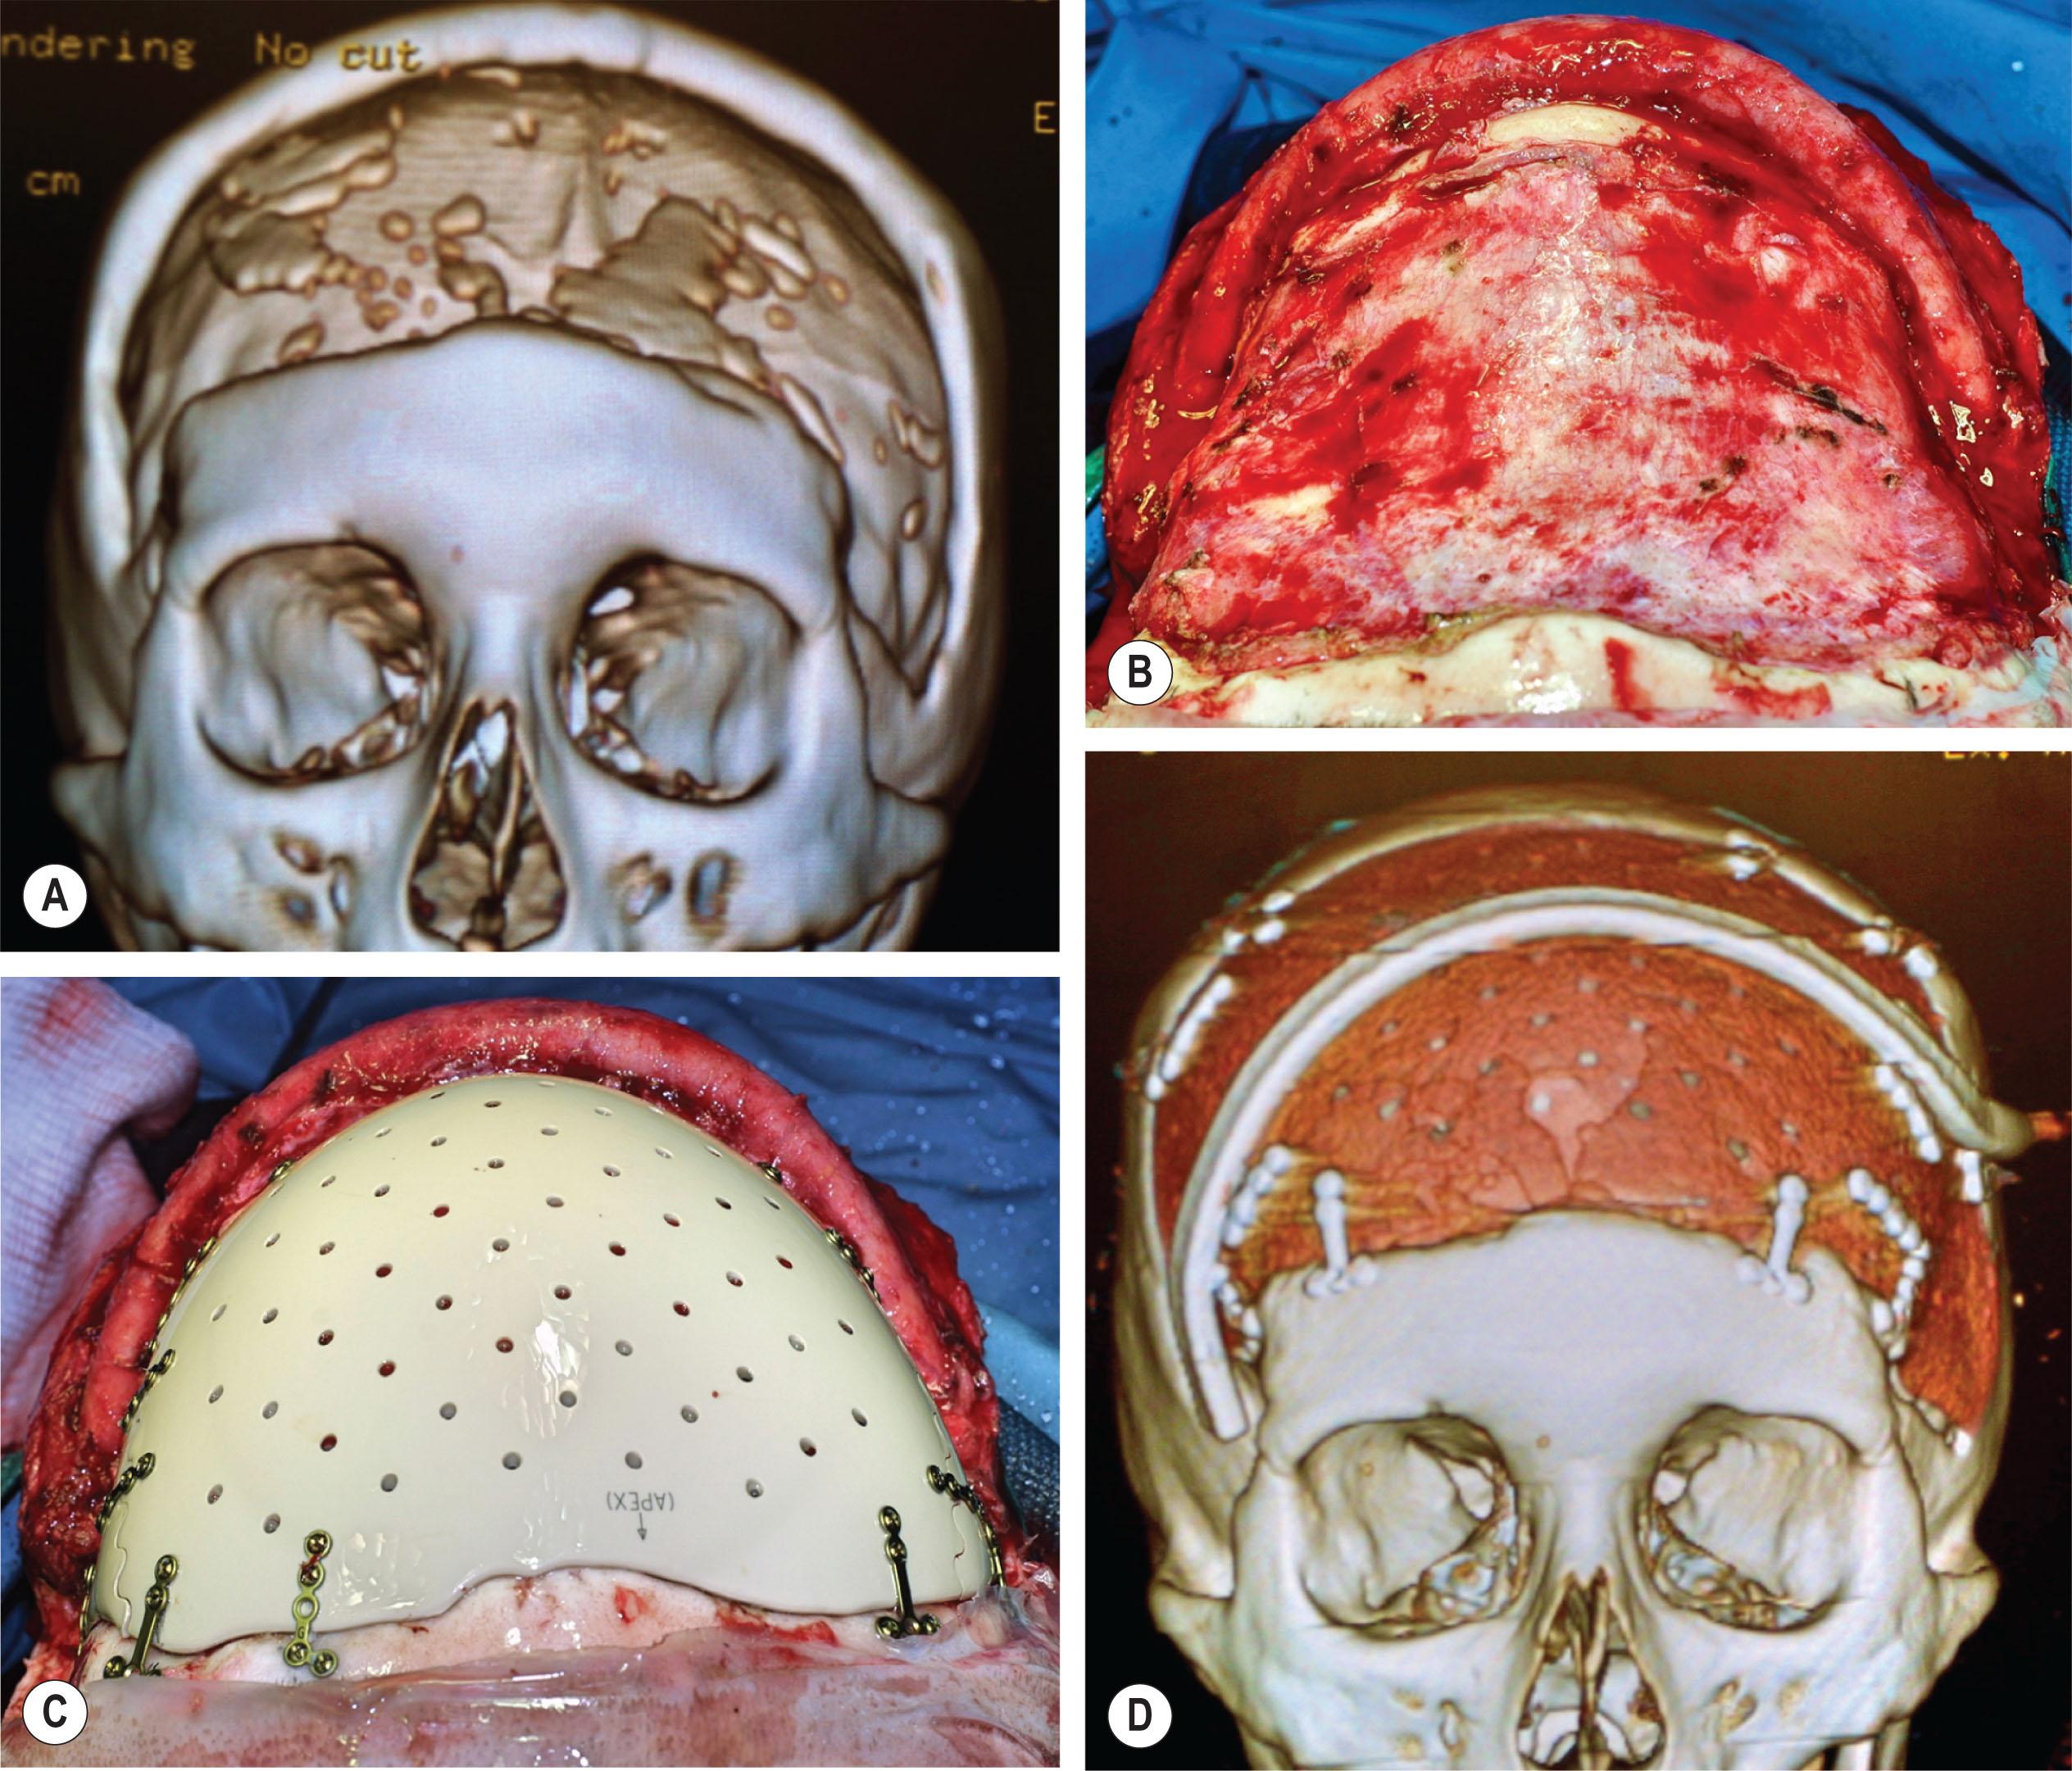 Figure 5.4, (A) Post-craniotomy full-thickness bifronto-temporo-parietal skull defect. (B) The defect is superior to the paranasal sinuses which are not exposed. (C) Computer modeling and rapid prototyping allowed prefabrication of a patient-specific polymer implant. (D) Postoperative imaging shows restoration of normal cranial morphology.